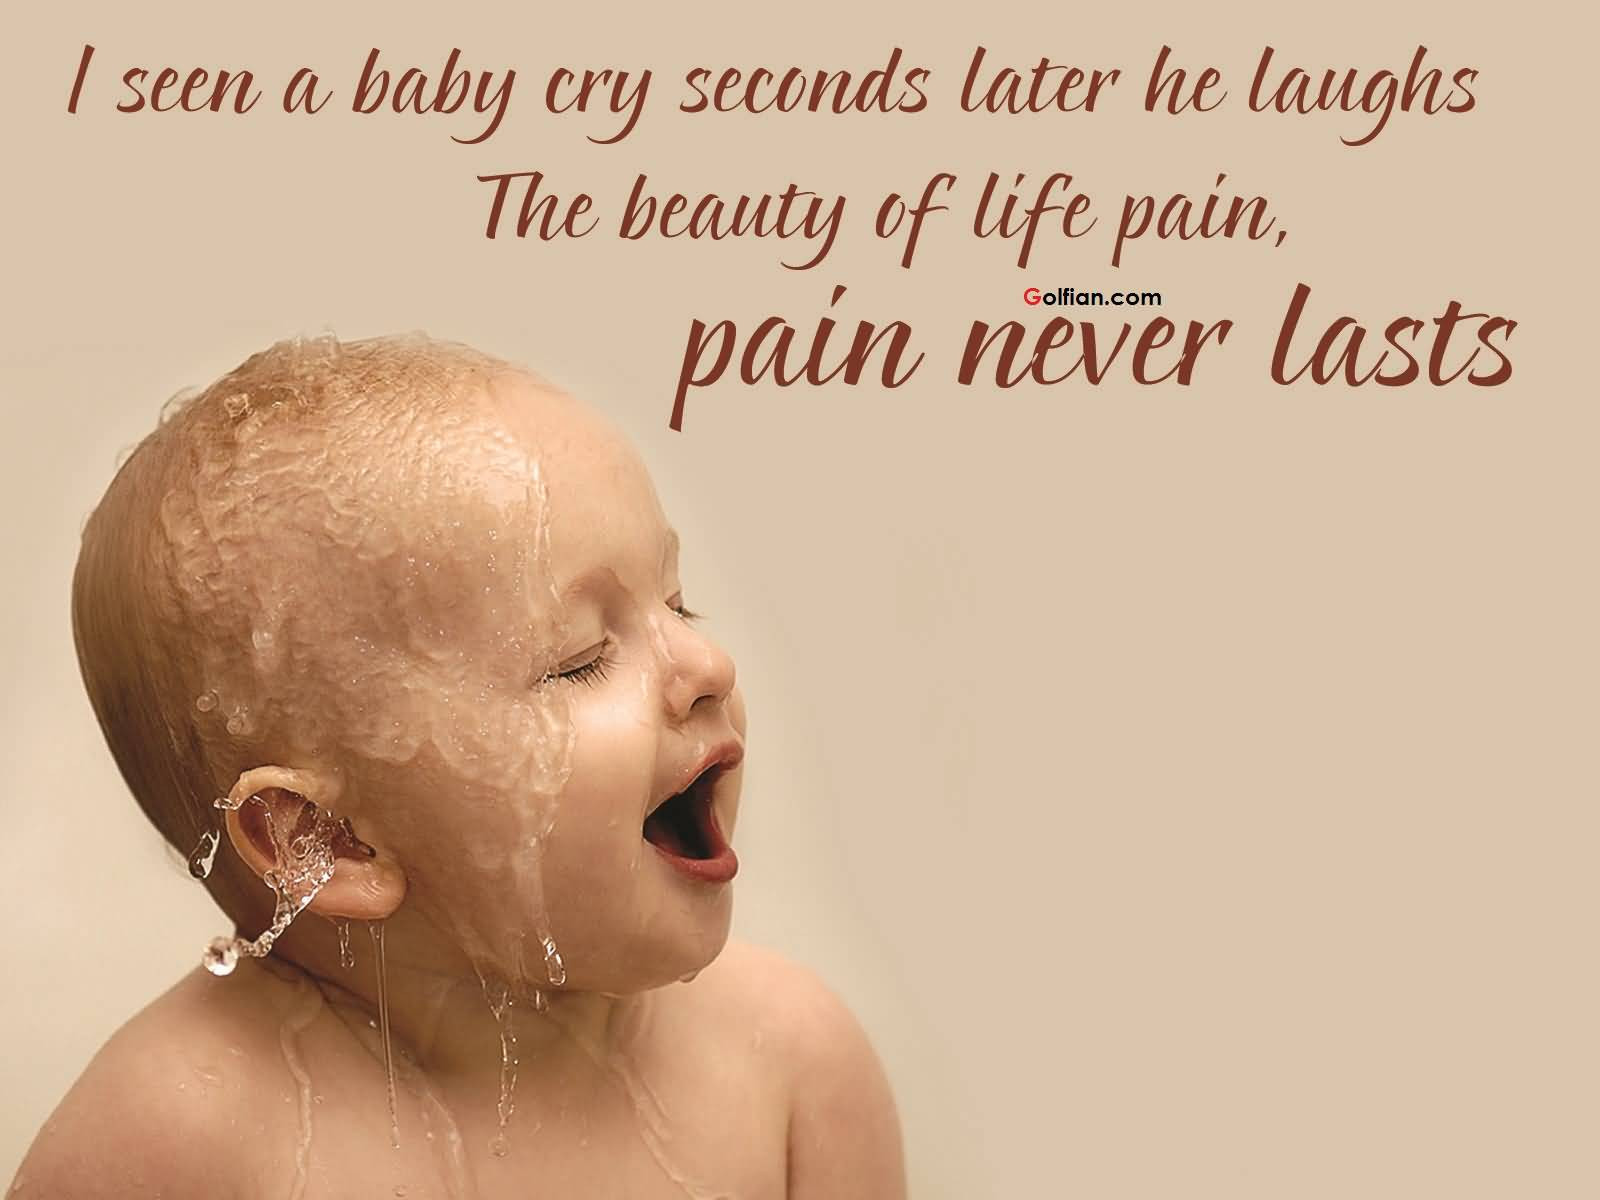 Baby Cute Quotes
 60 Wonderful Short Baby Quotes – Cute Funny Baby Saying